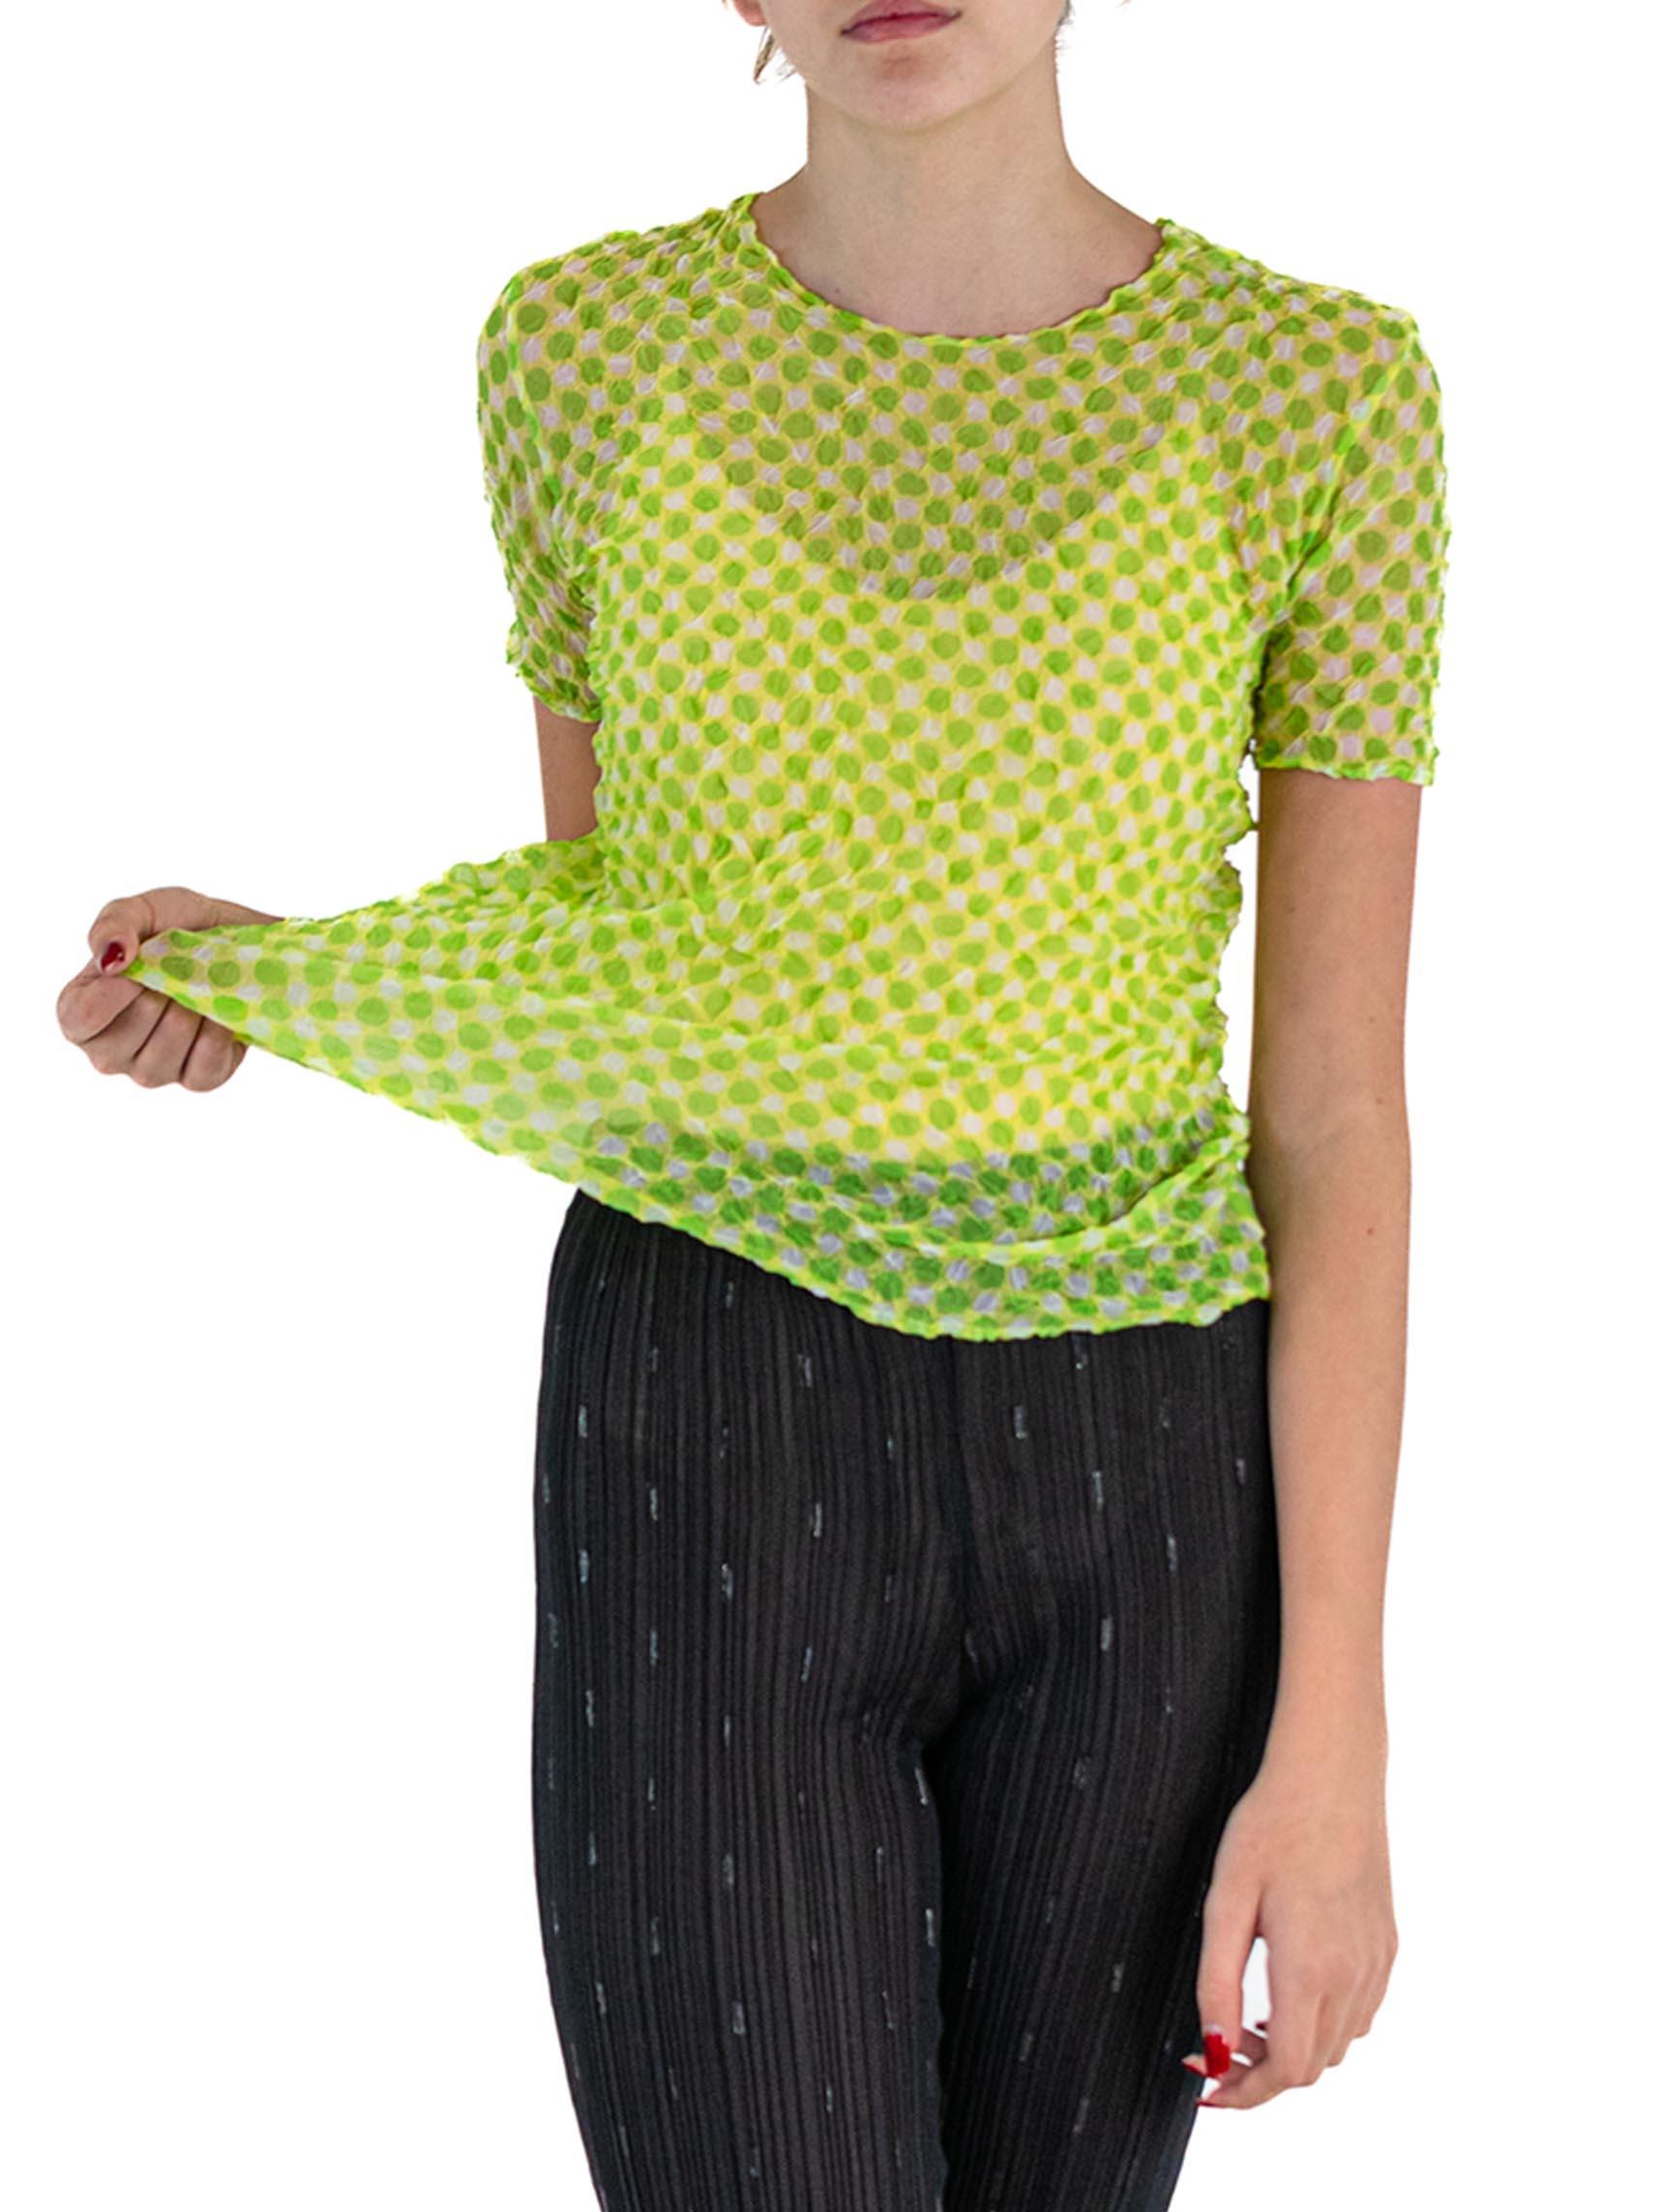 Women's 1990S ISSEY MIYAKE Lime Green Sheer Polyester Shrink Wrap Top With Polka Dots For Sale